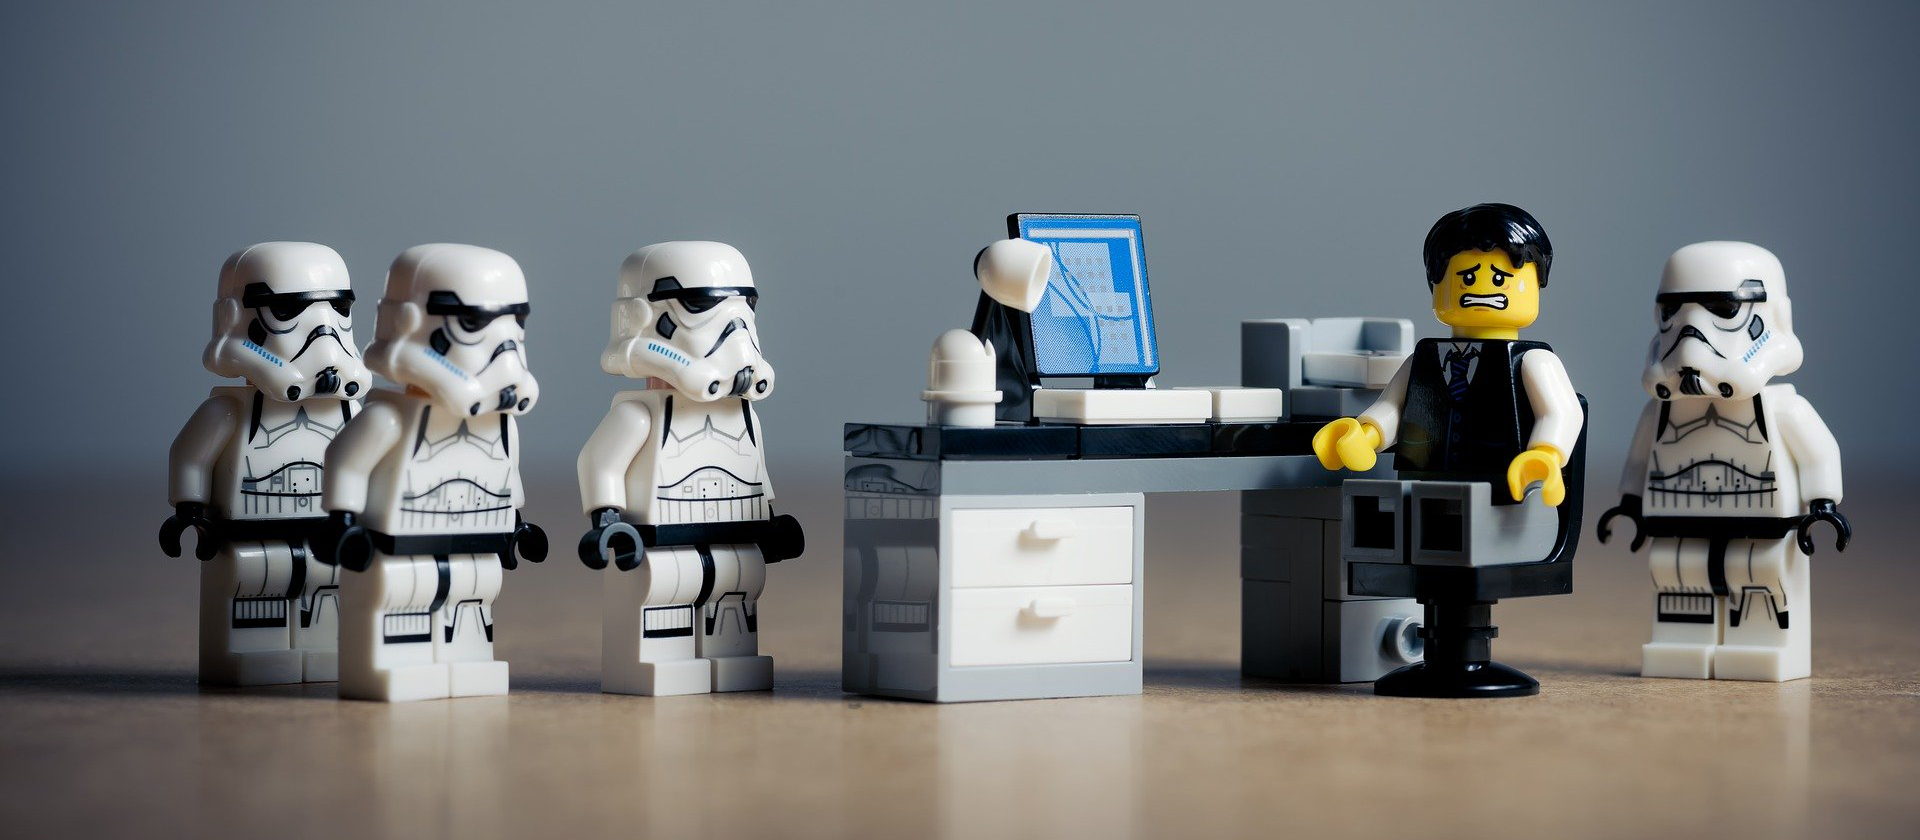 LEGO stormtroopers surrounding someone at a desk